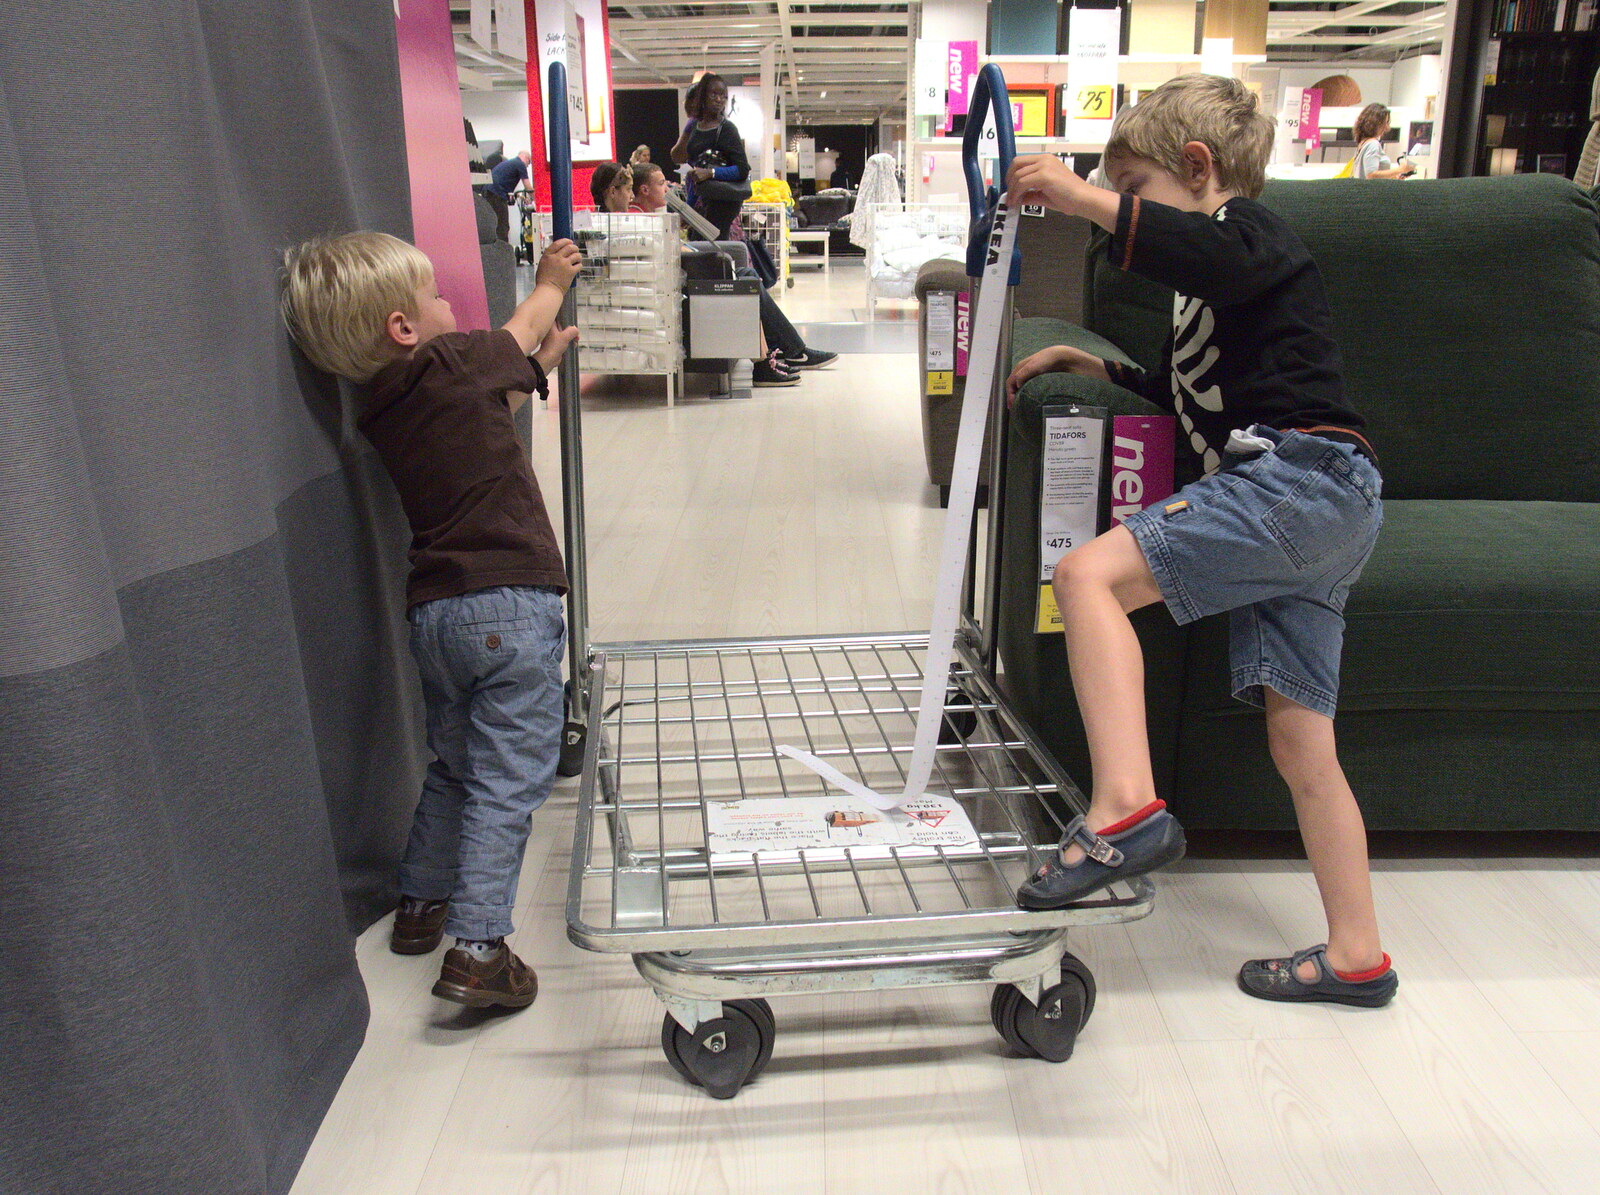 Harry and Fred mess around in Ikea from New Railway and a Trip to Ikea, Ipswich and Thurrock - 19th September 2014